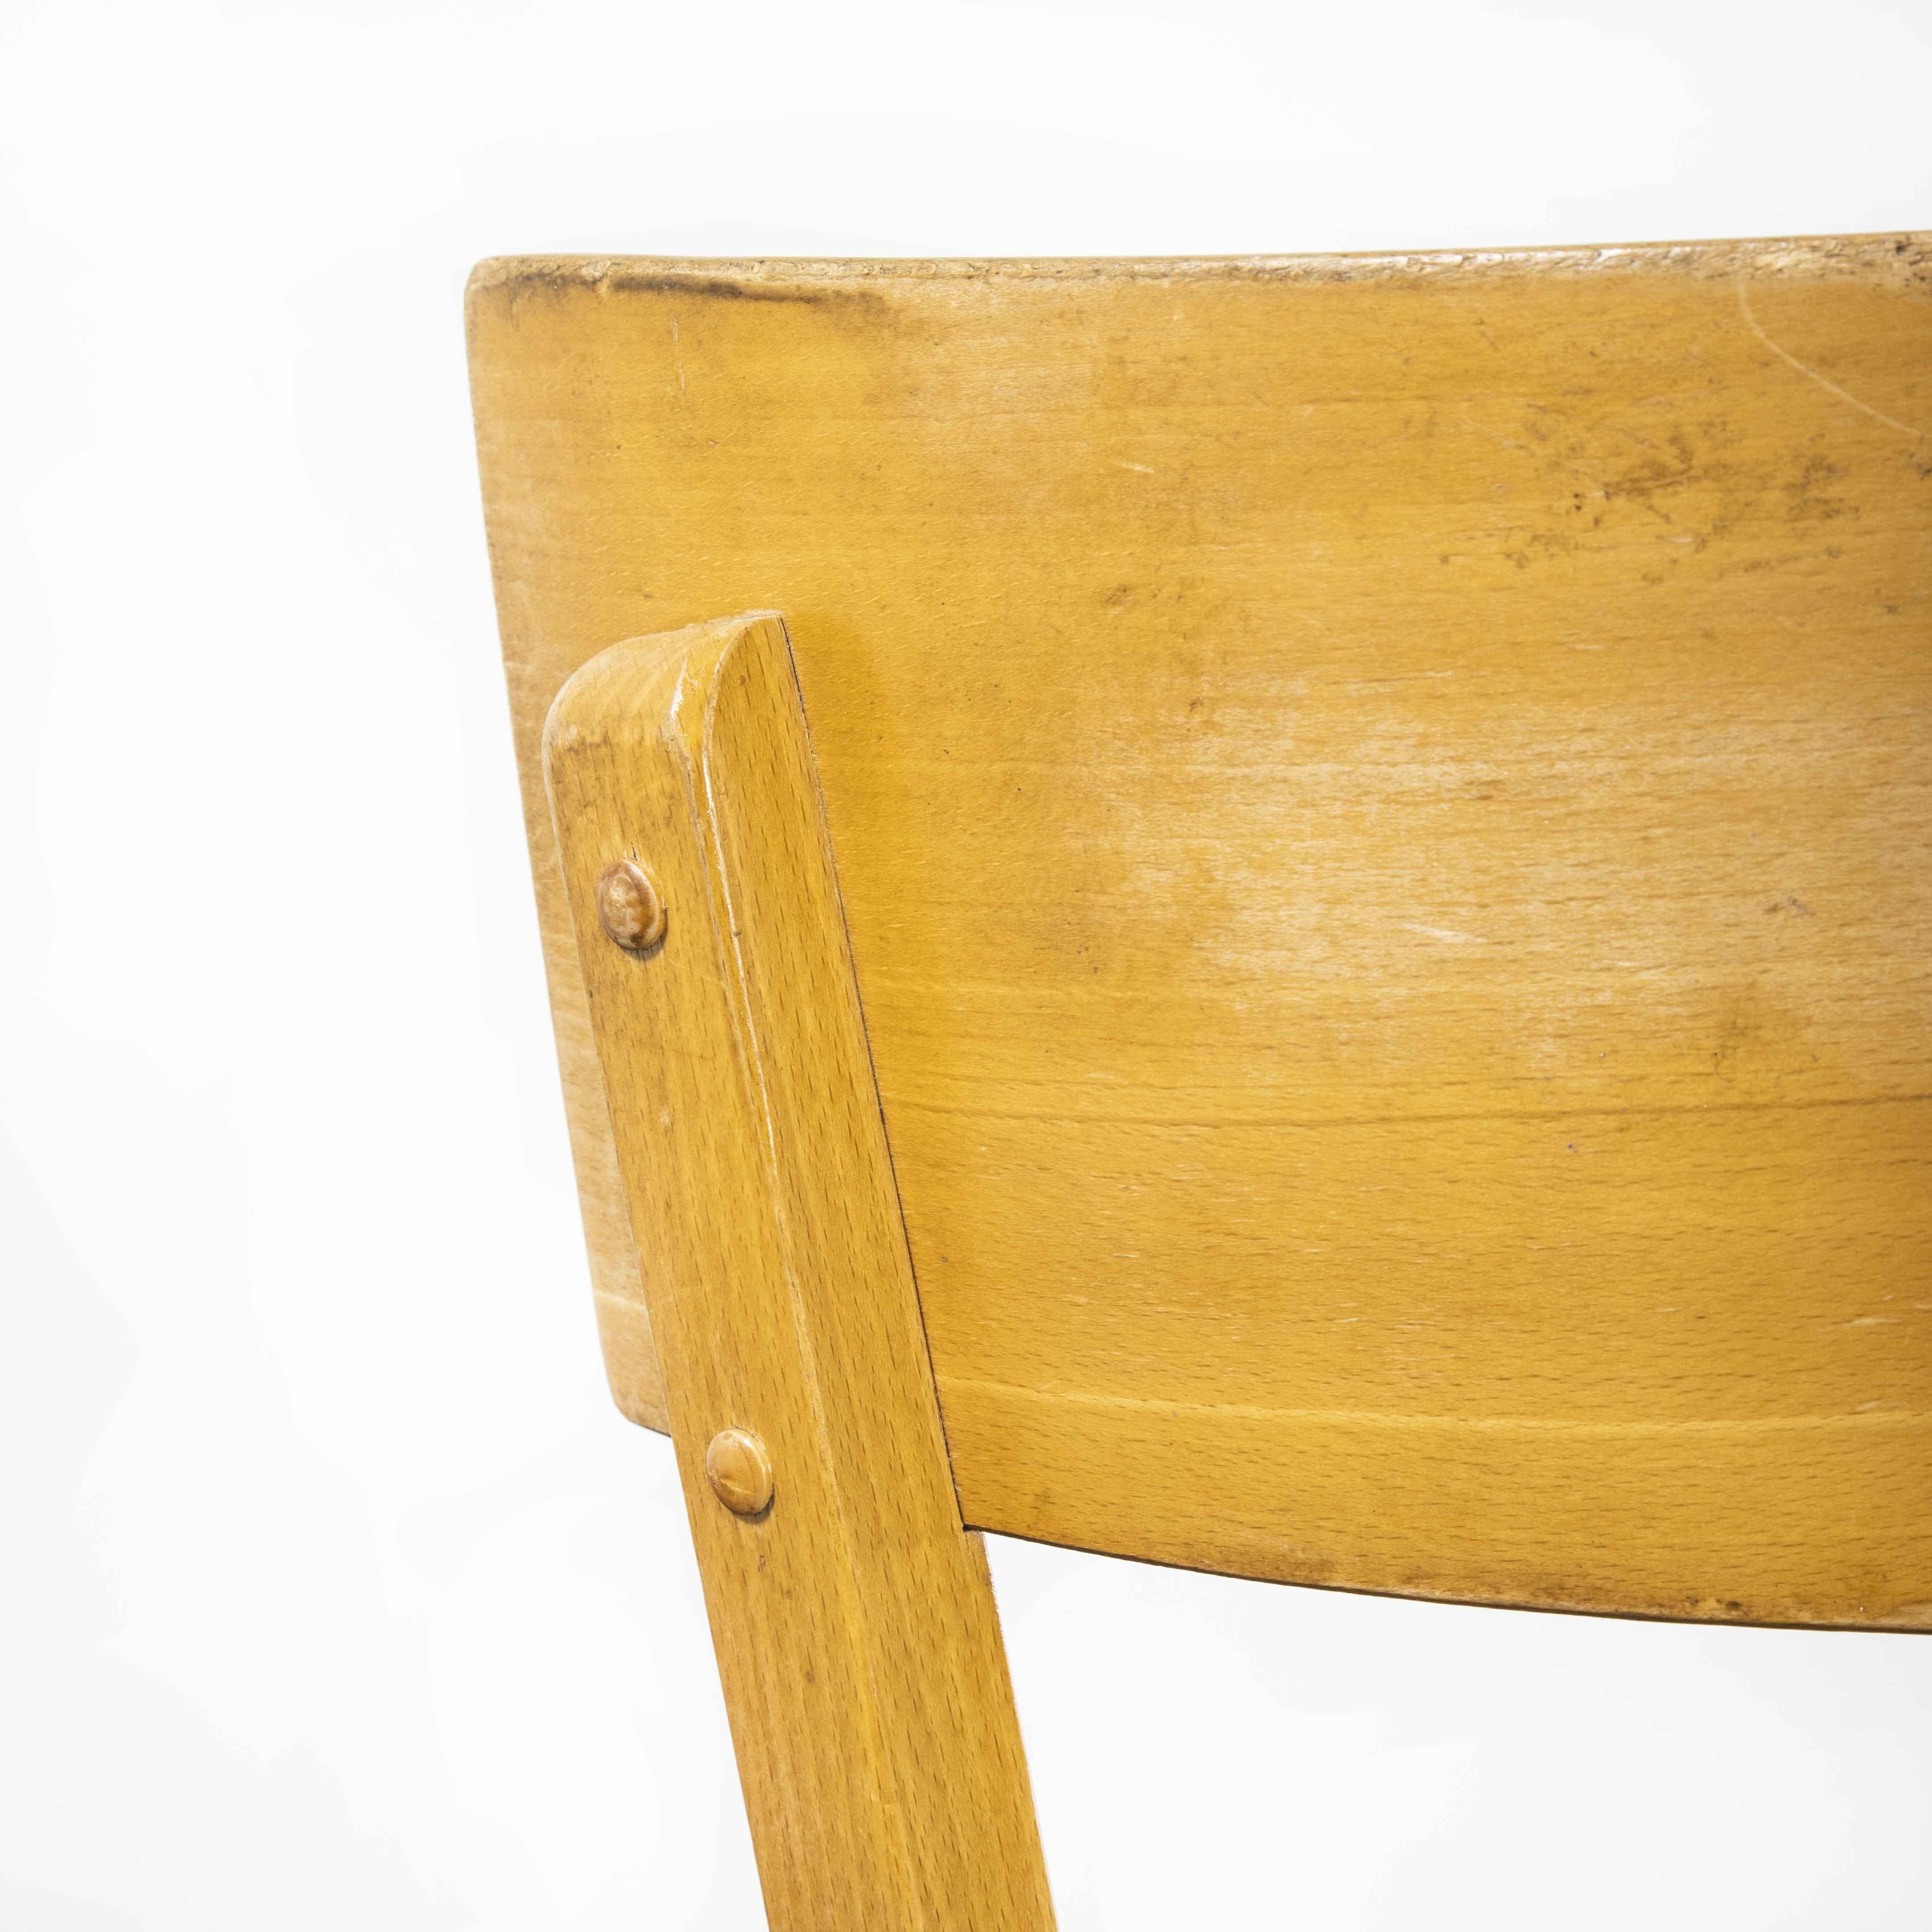 1950’s French Baumann blonde beech bentwood dining chairs – set of eight
1950’s French Baumann blonde beech bentwood dining chairs – set of eight. Baumann is a slightly off the radar French producer just starting to gain traction in the market.